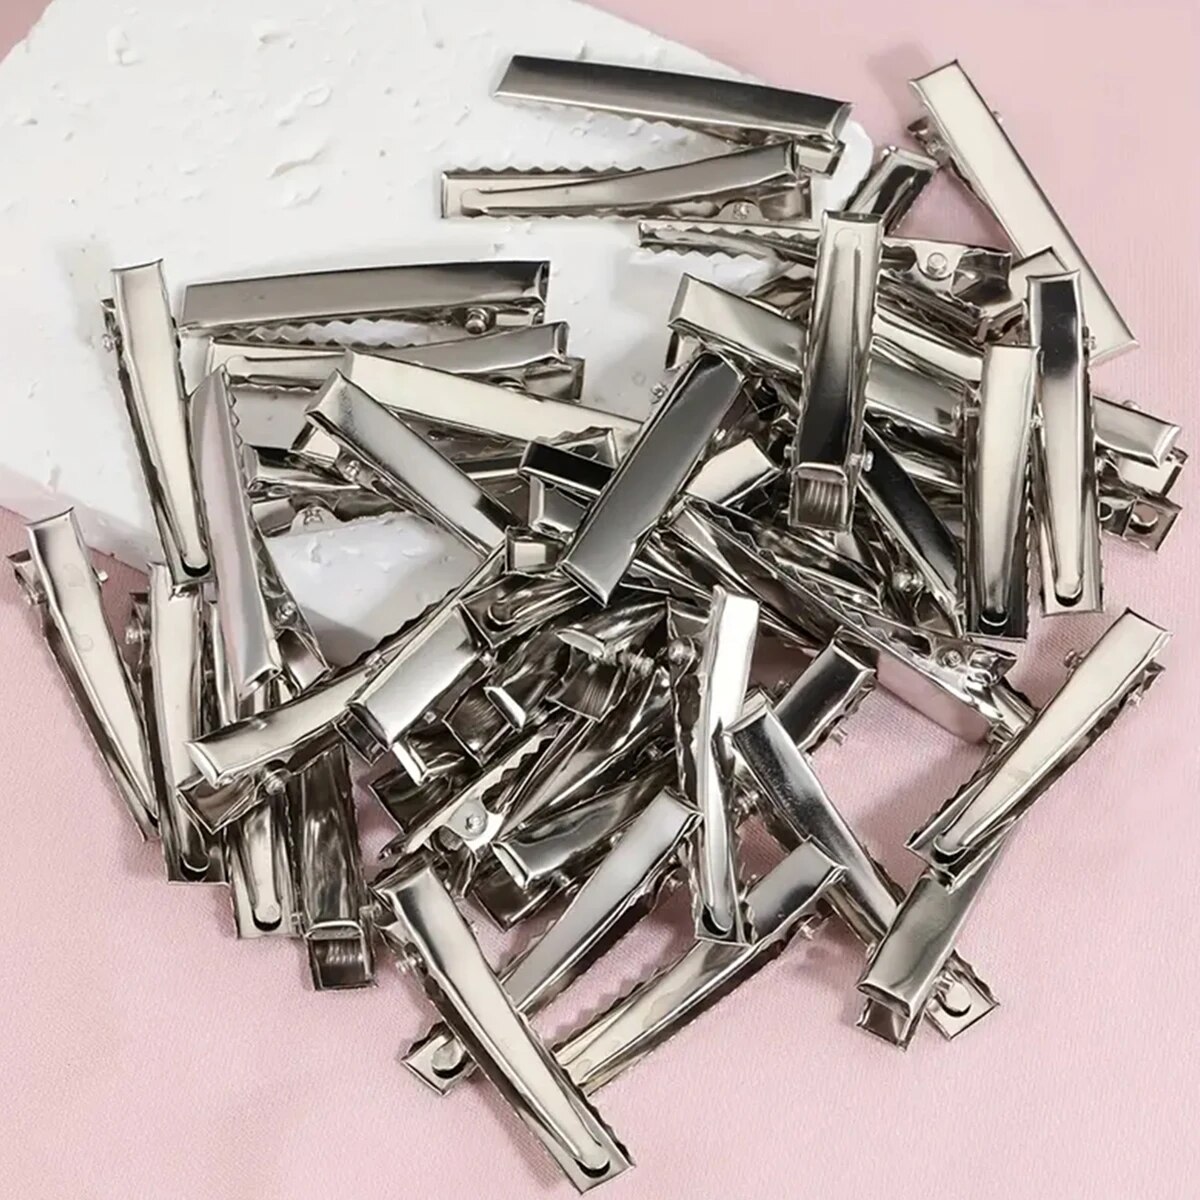 40st Metal Hair Alligator Clips Duckbill Clip for Girls 3,2 cm Single Prong Alligator Hairpins Hair Style Tools Accessories